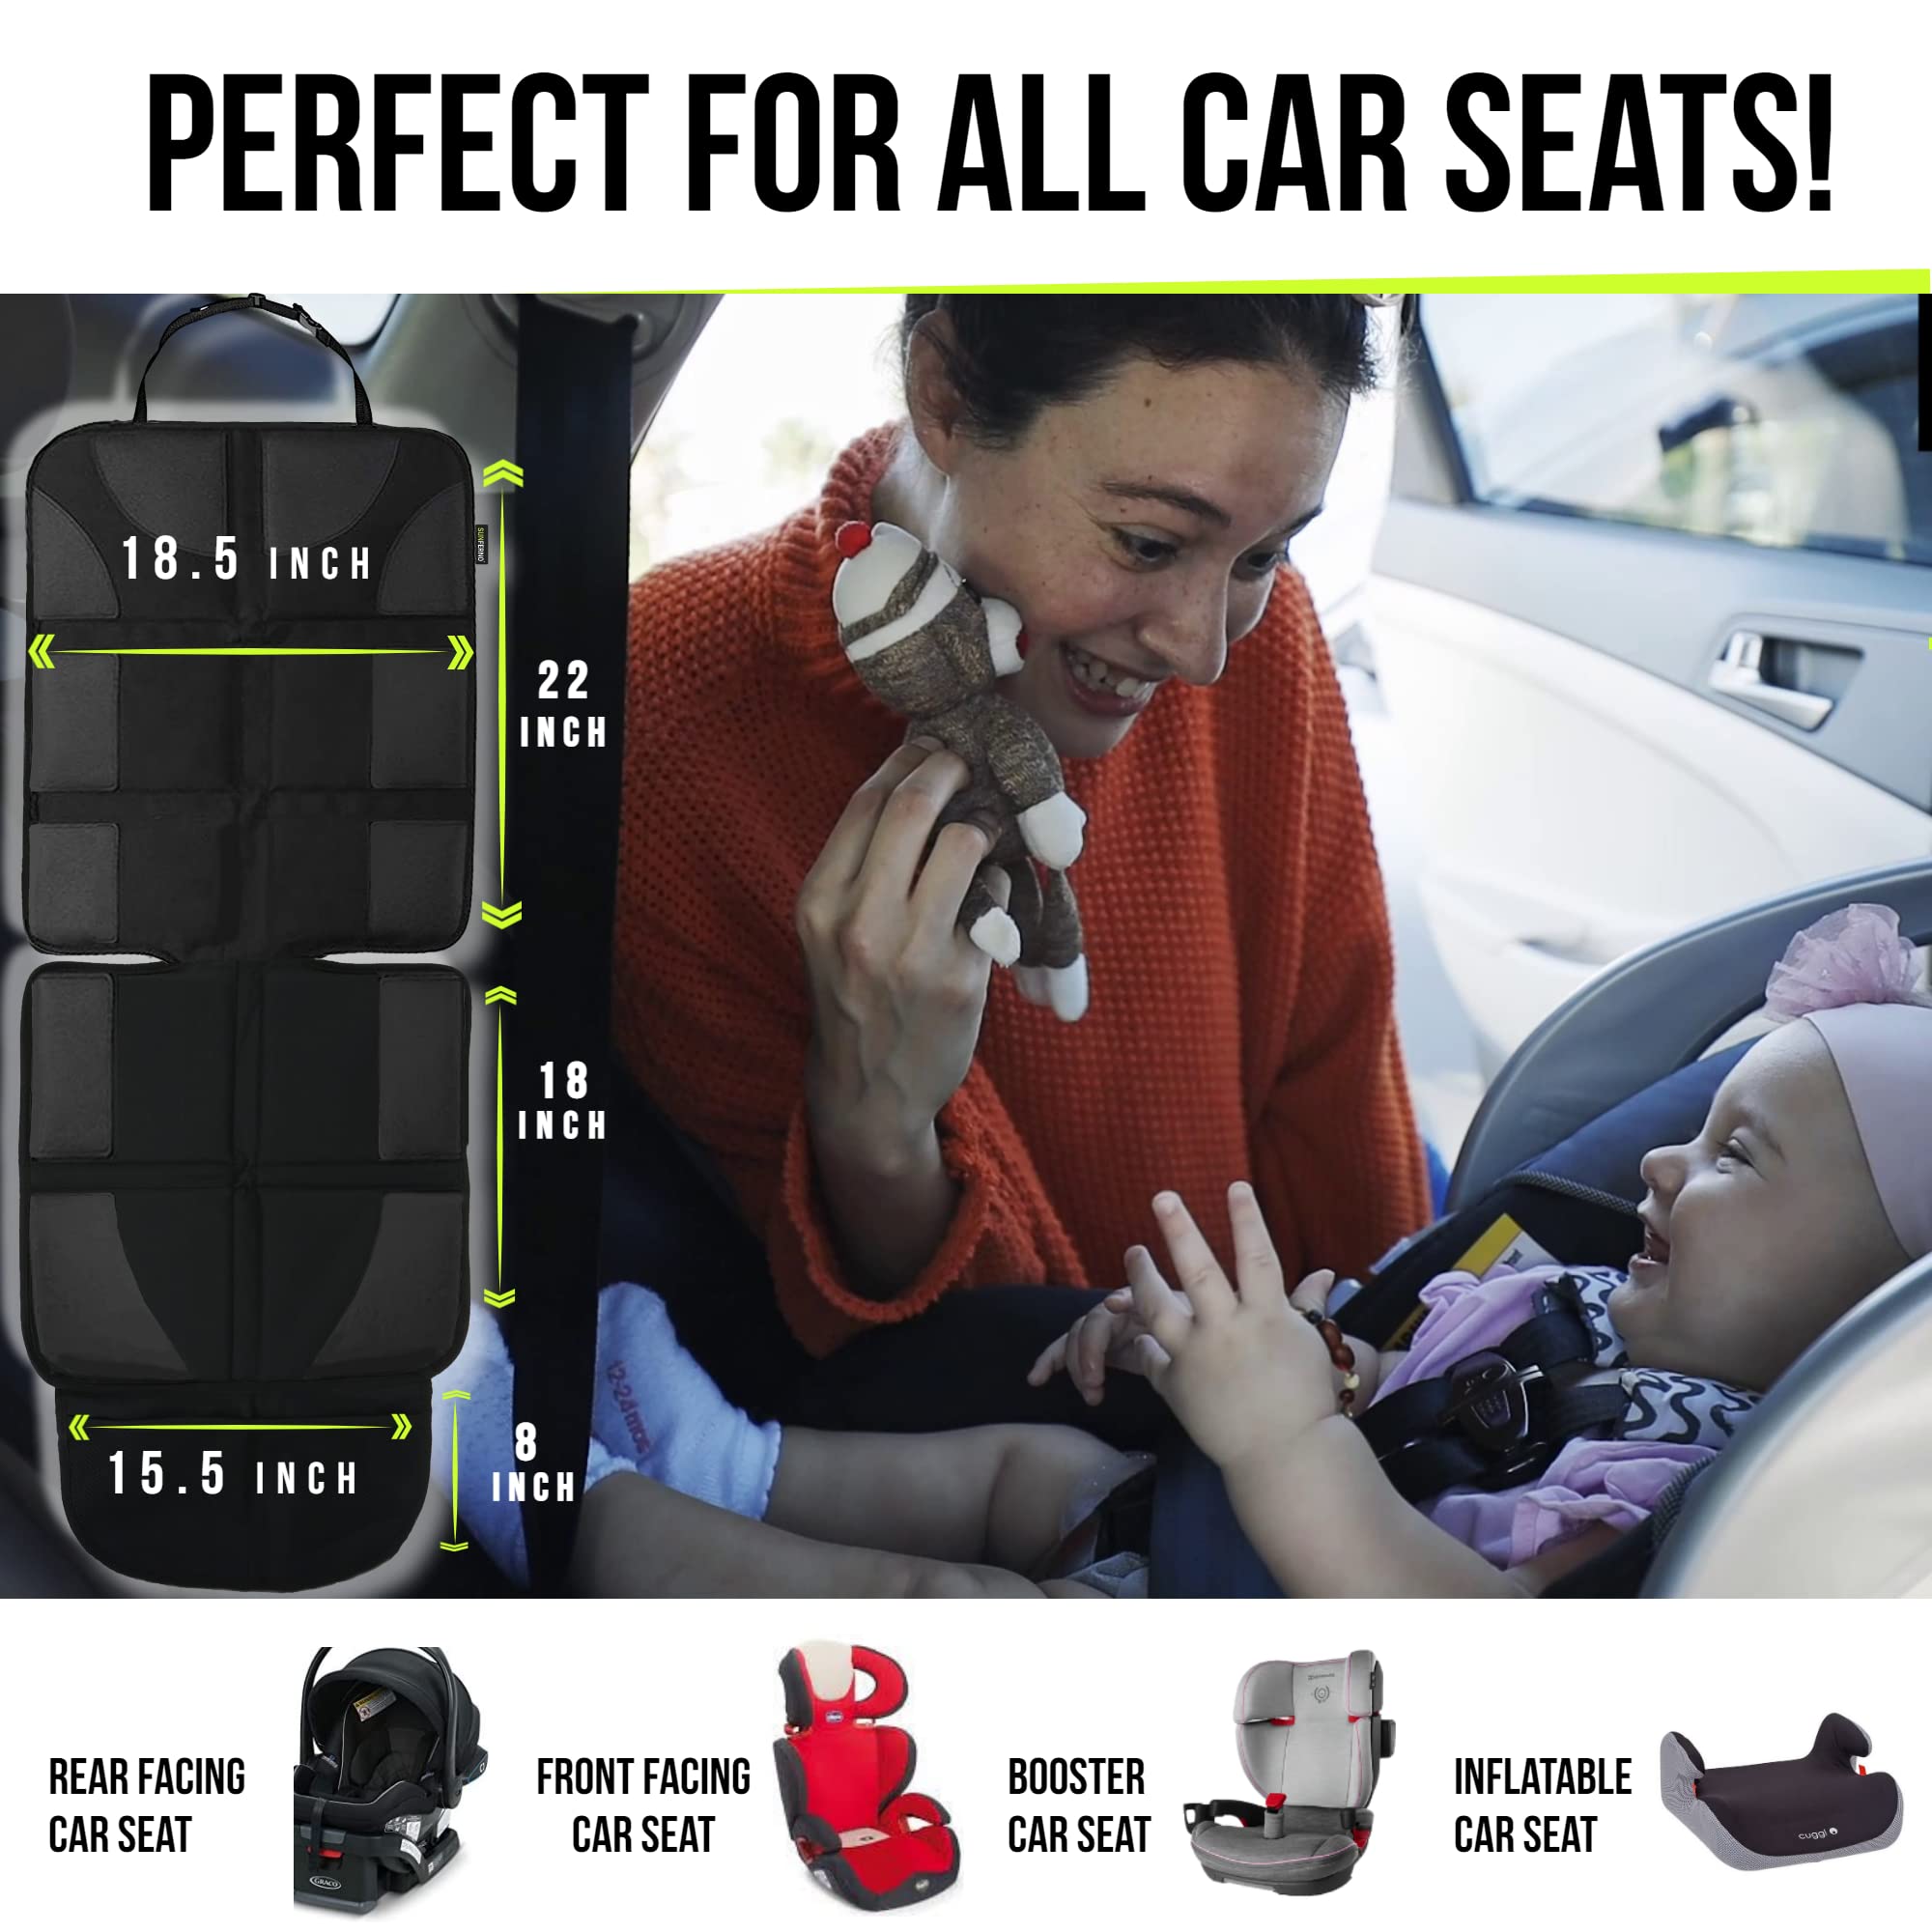 Sunferno Car Seat Protector for Child Car Seat - Non-Slip Water Resistant Thickest Padding Mesh Pockets Carseat Seat Protector - Toddler Car Seat for Leather Seat - Car Seat Cover Pad for Dog & Pets